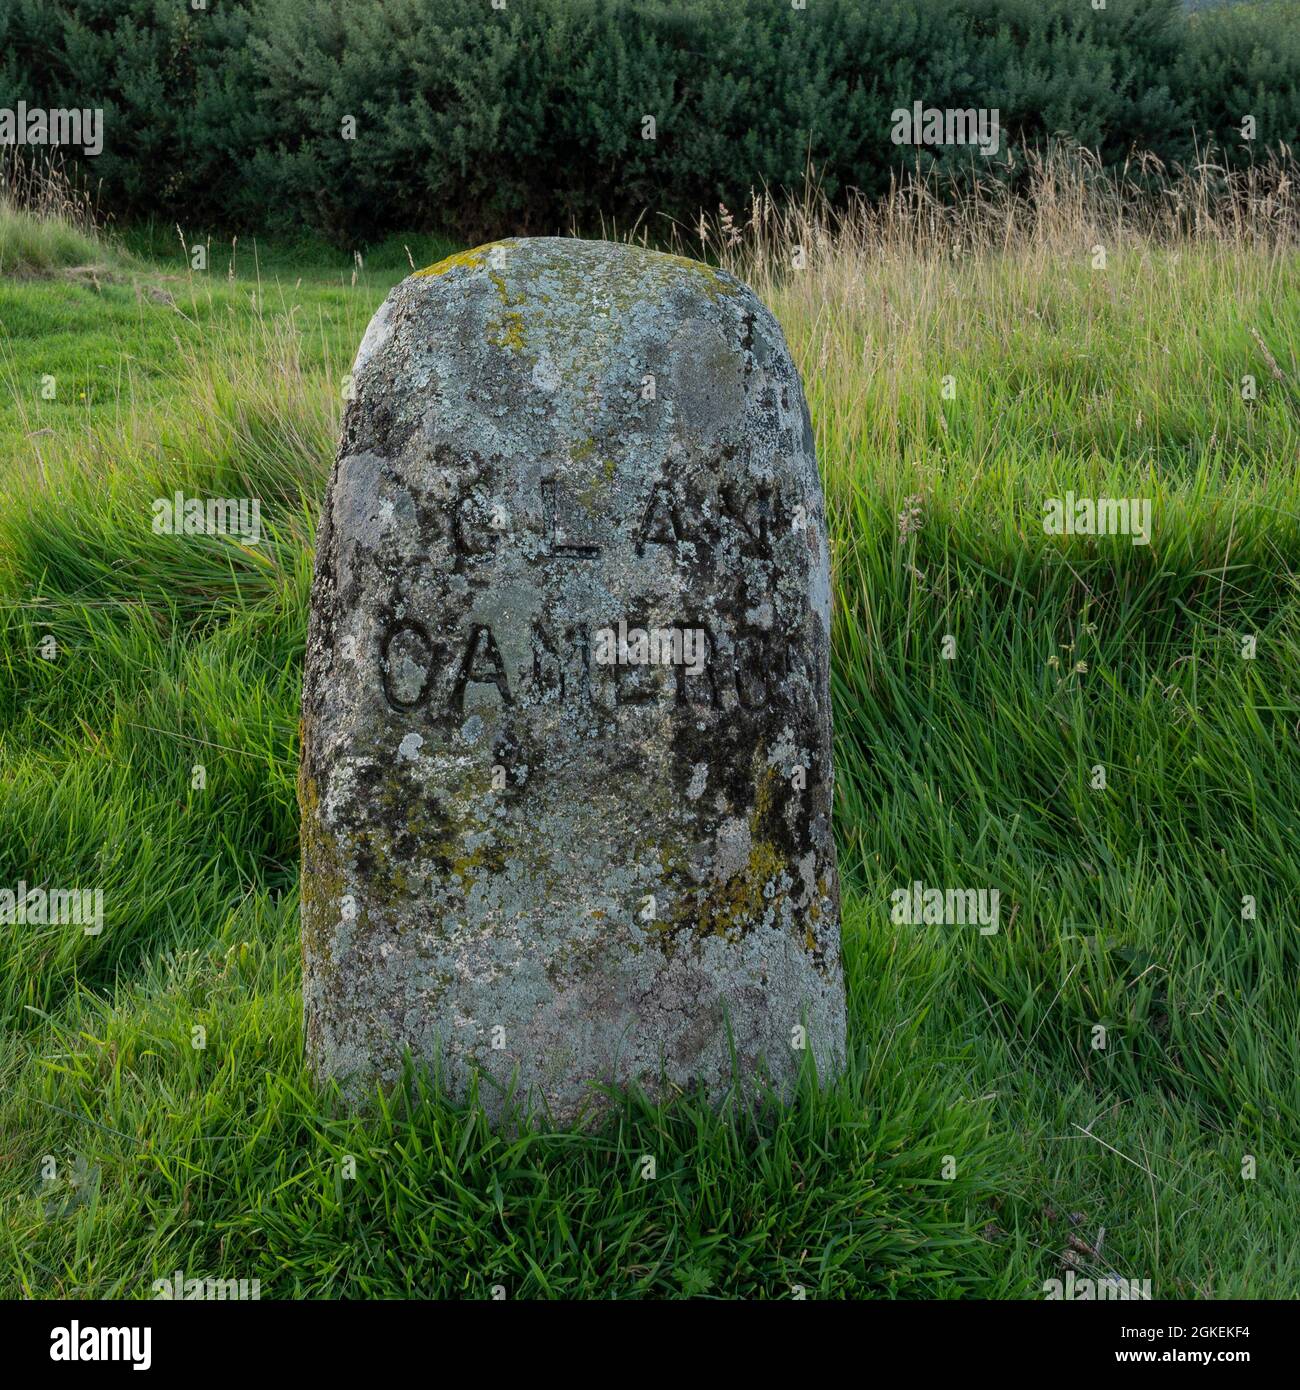 Culloden battlefield in Scotland. Isolated headstone for Clan Cameron with background of grass and other greenery. Stock Photo